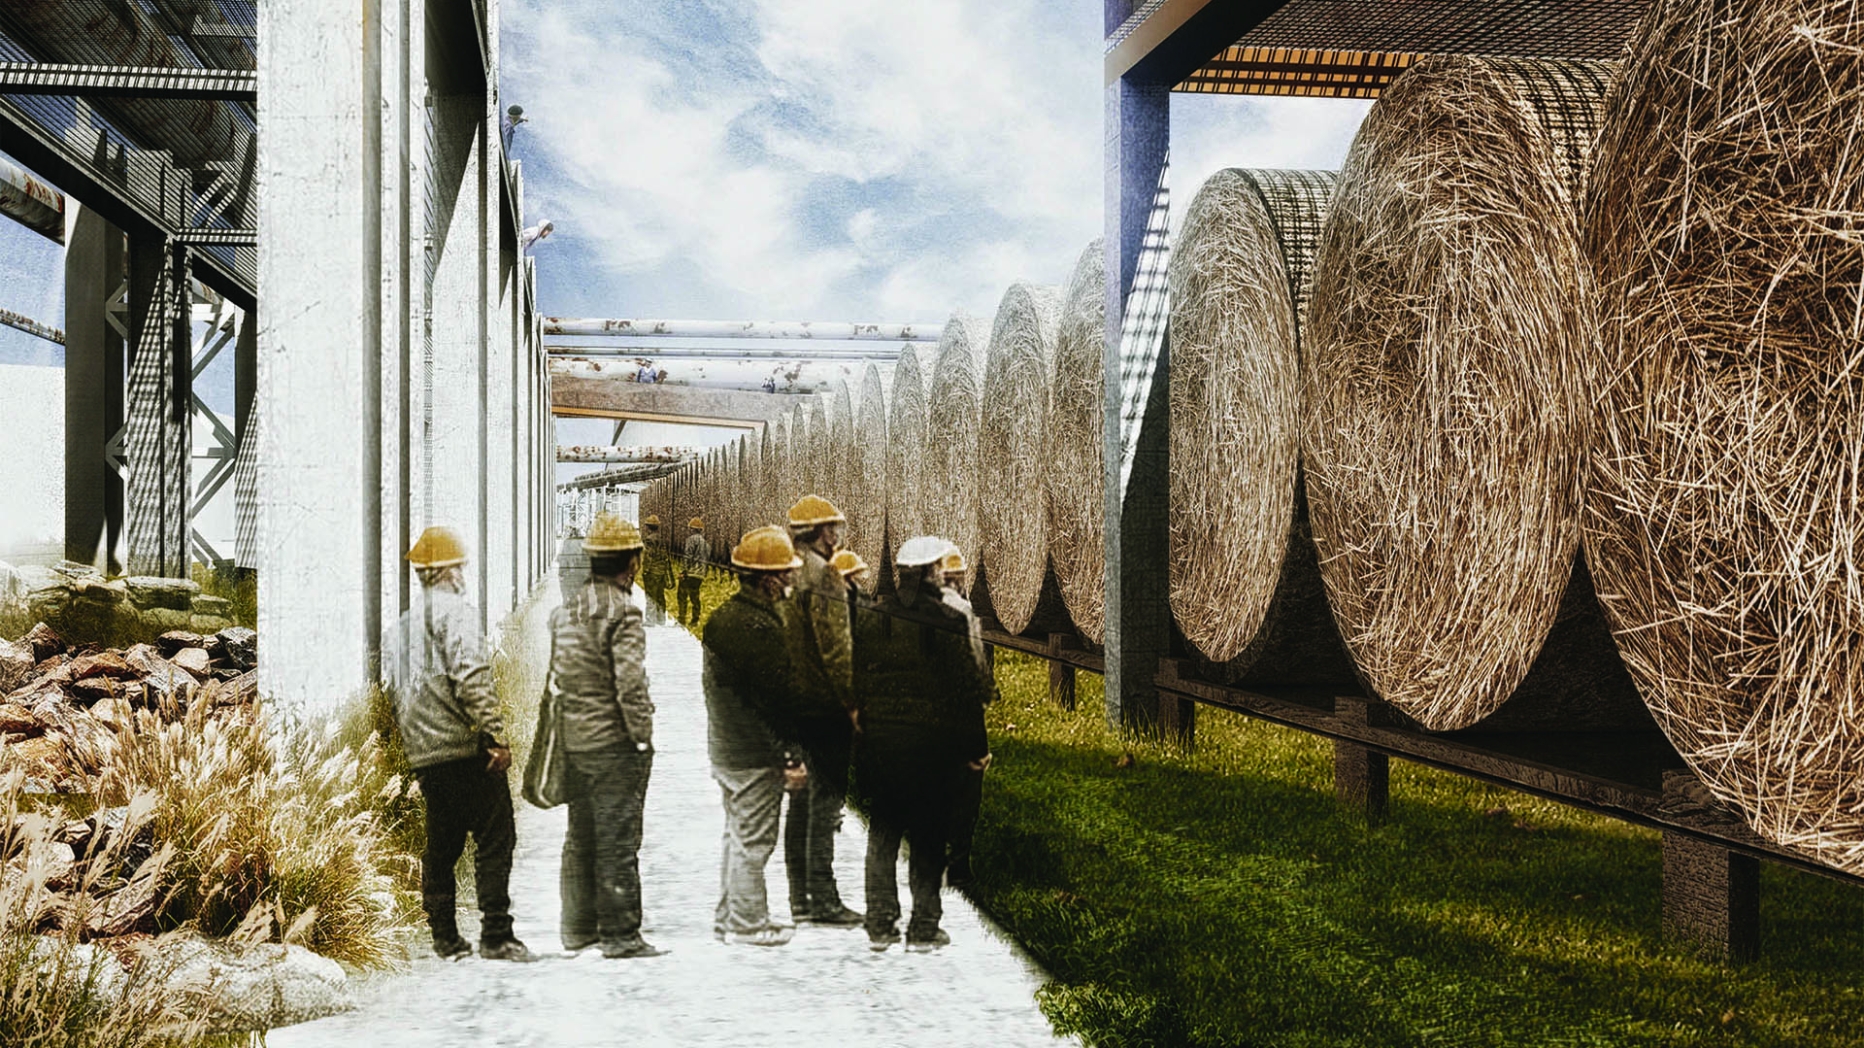 Group of people in hardhats viewing a mechanical device with huge bales of straw